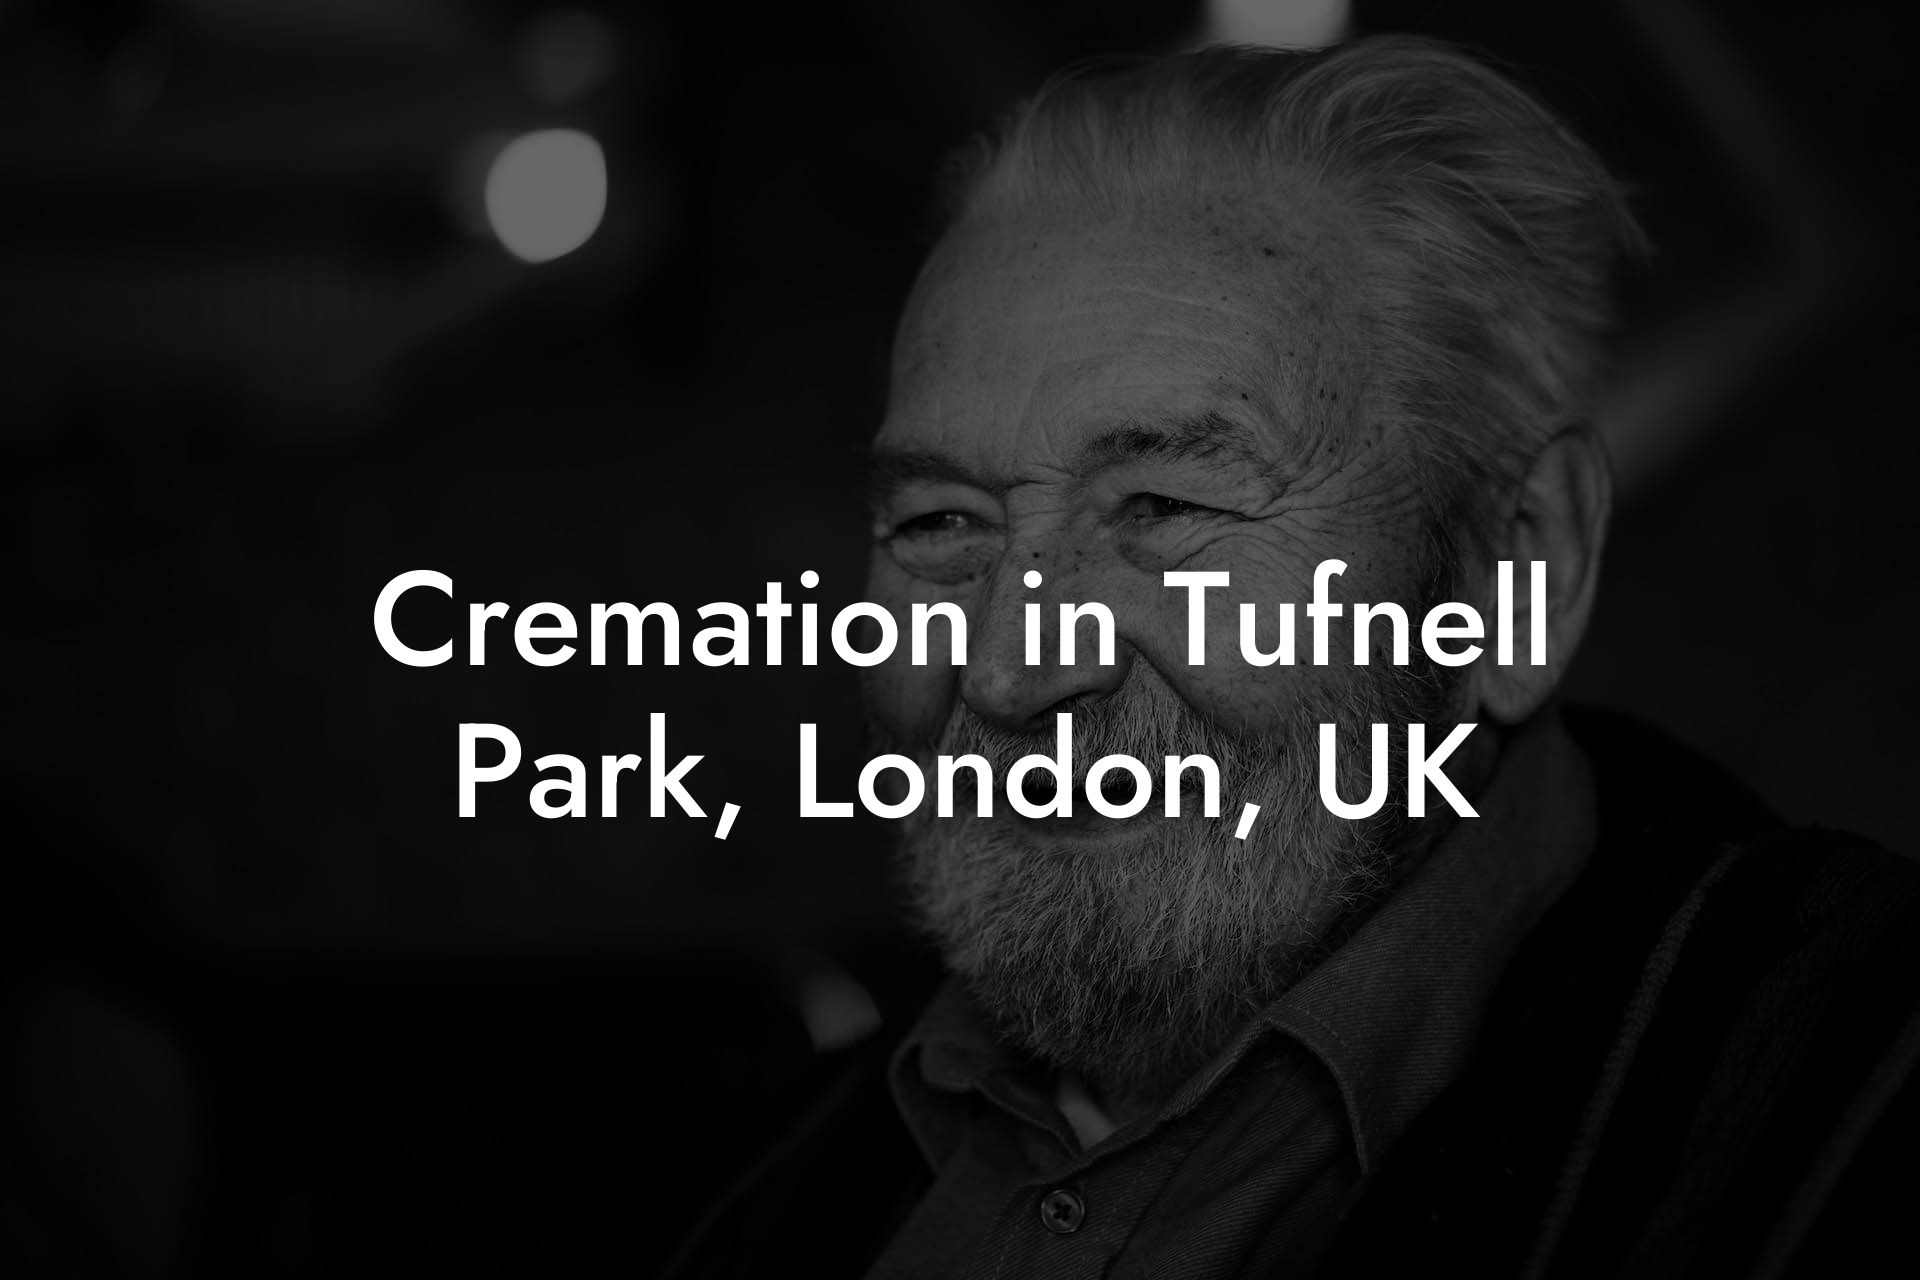 Cremation in Tufnell Park, London, UK